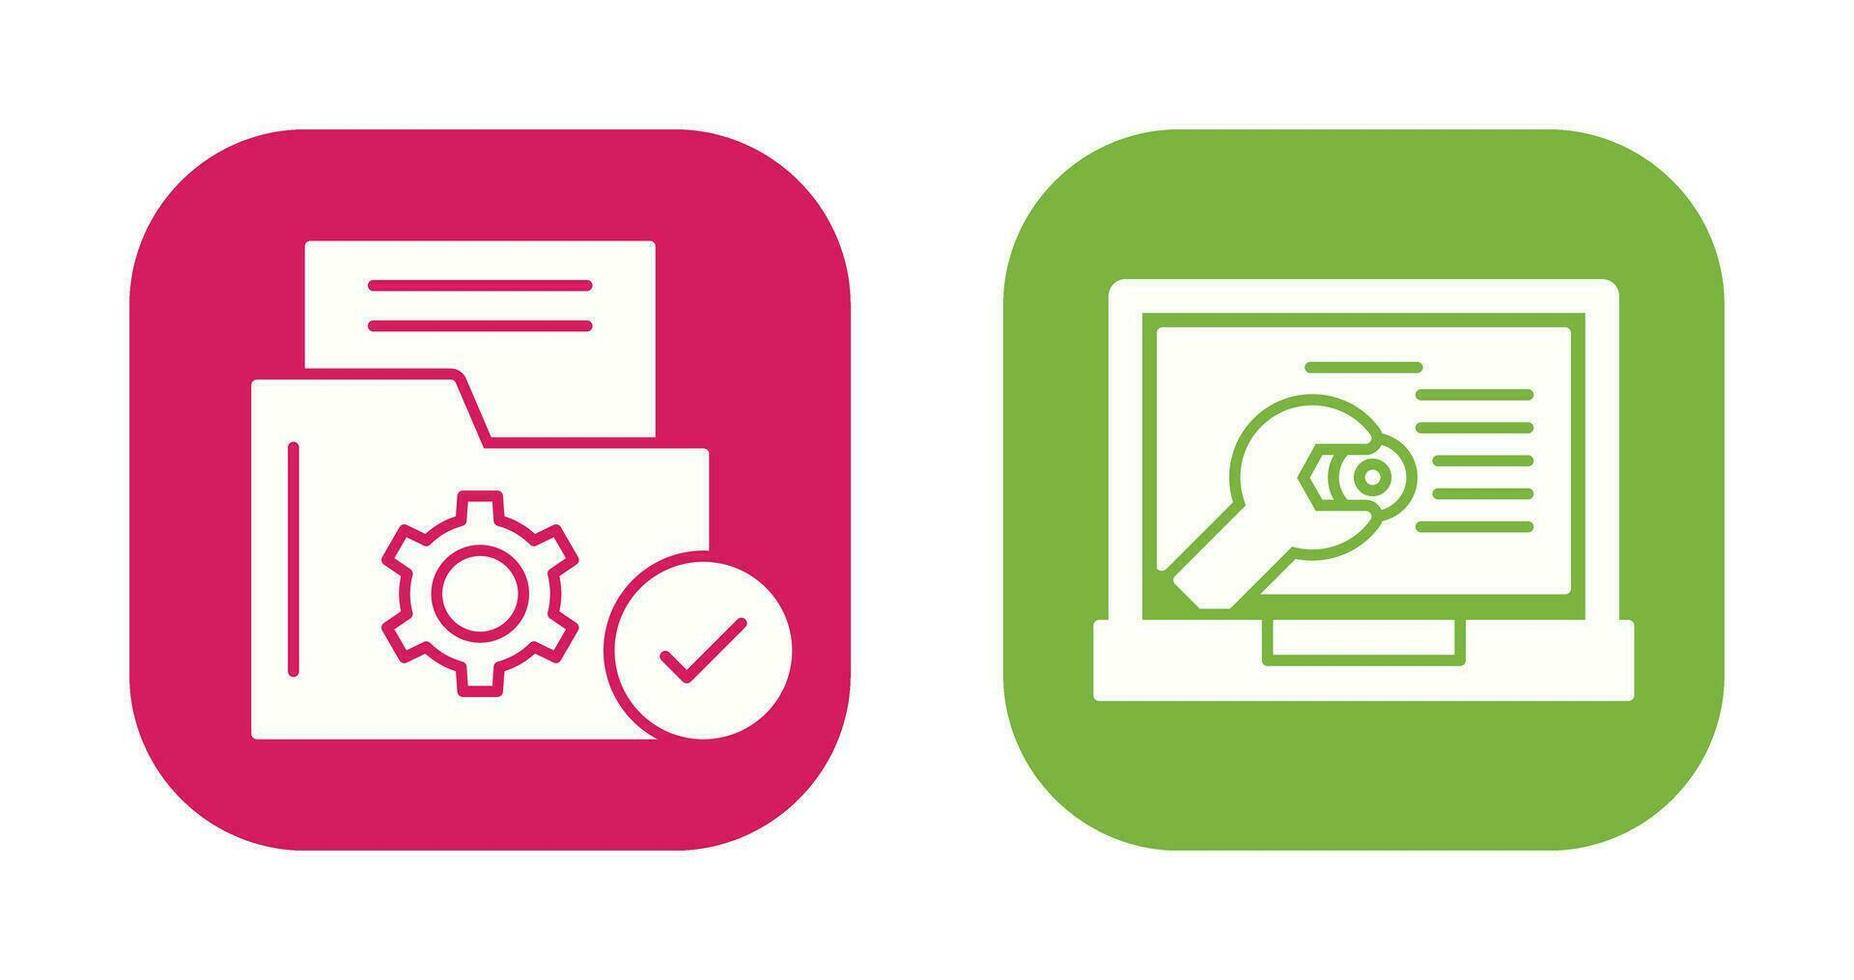 Folder and Repair Icon vector